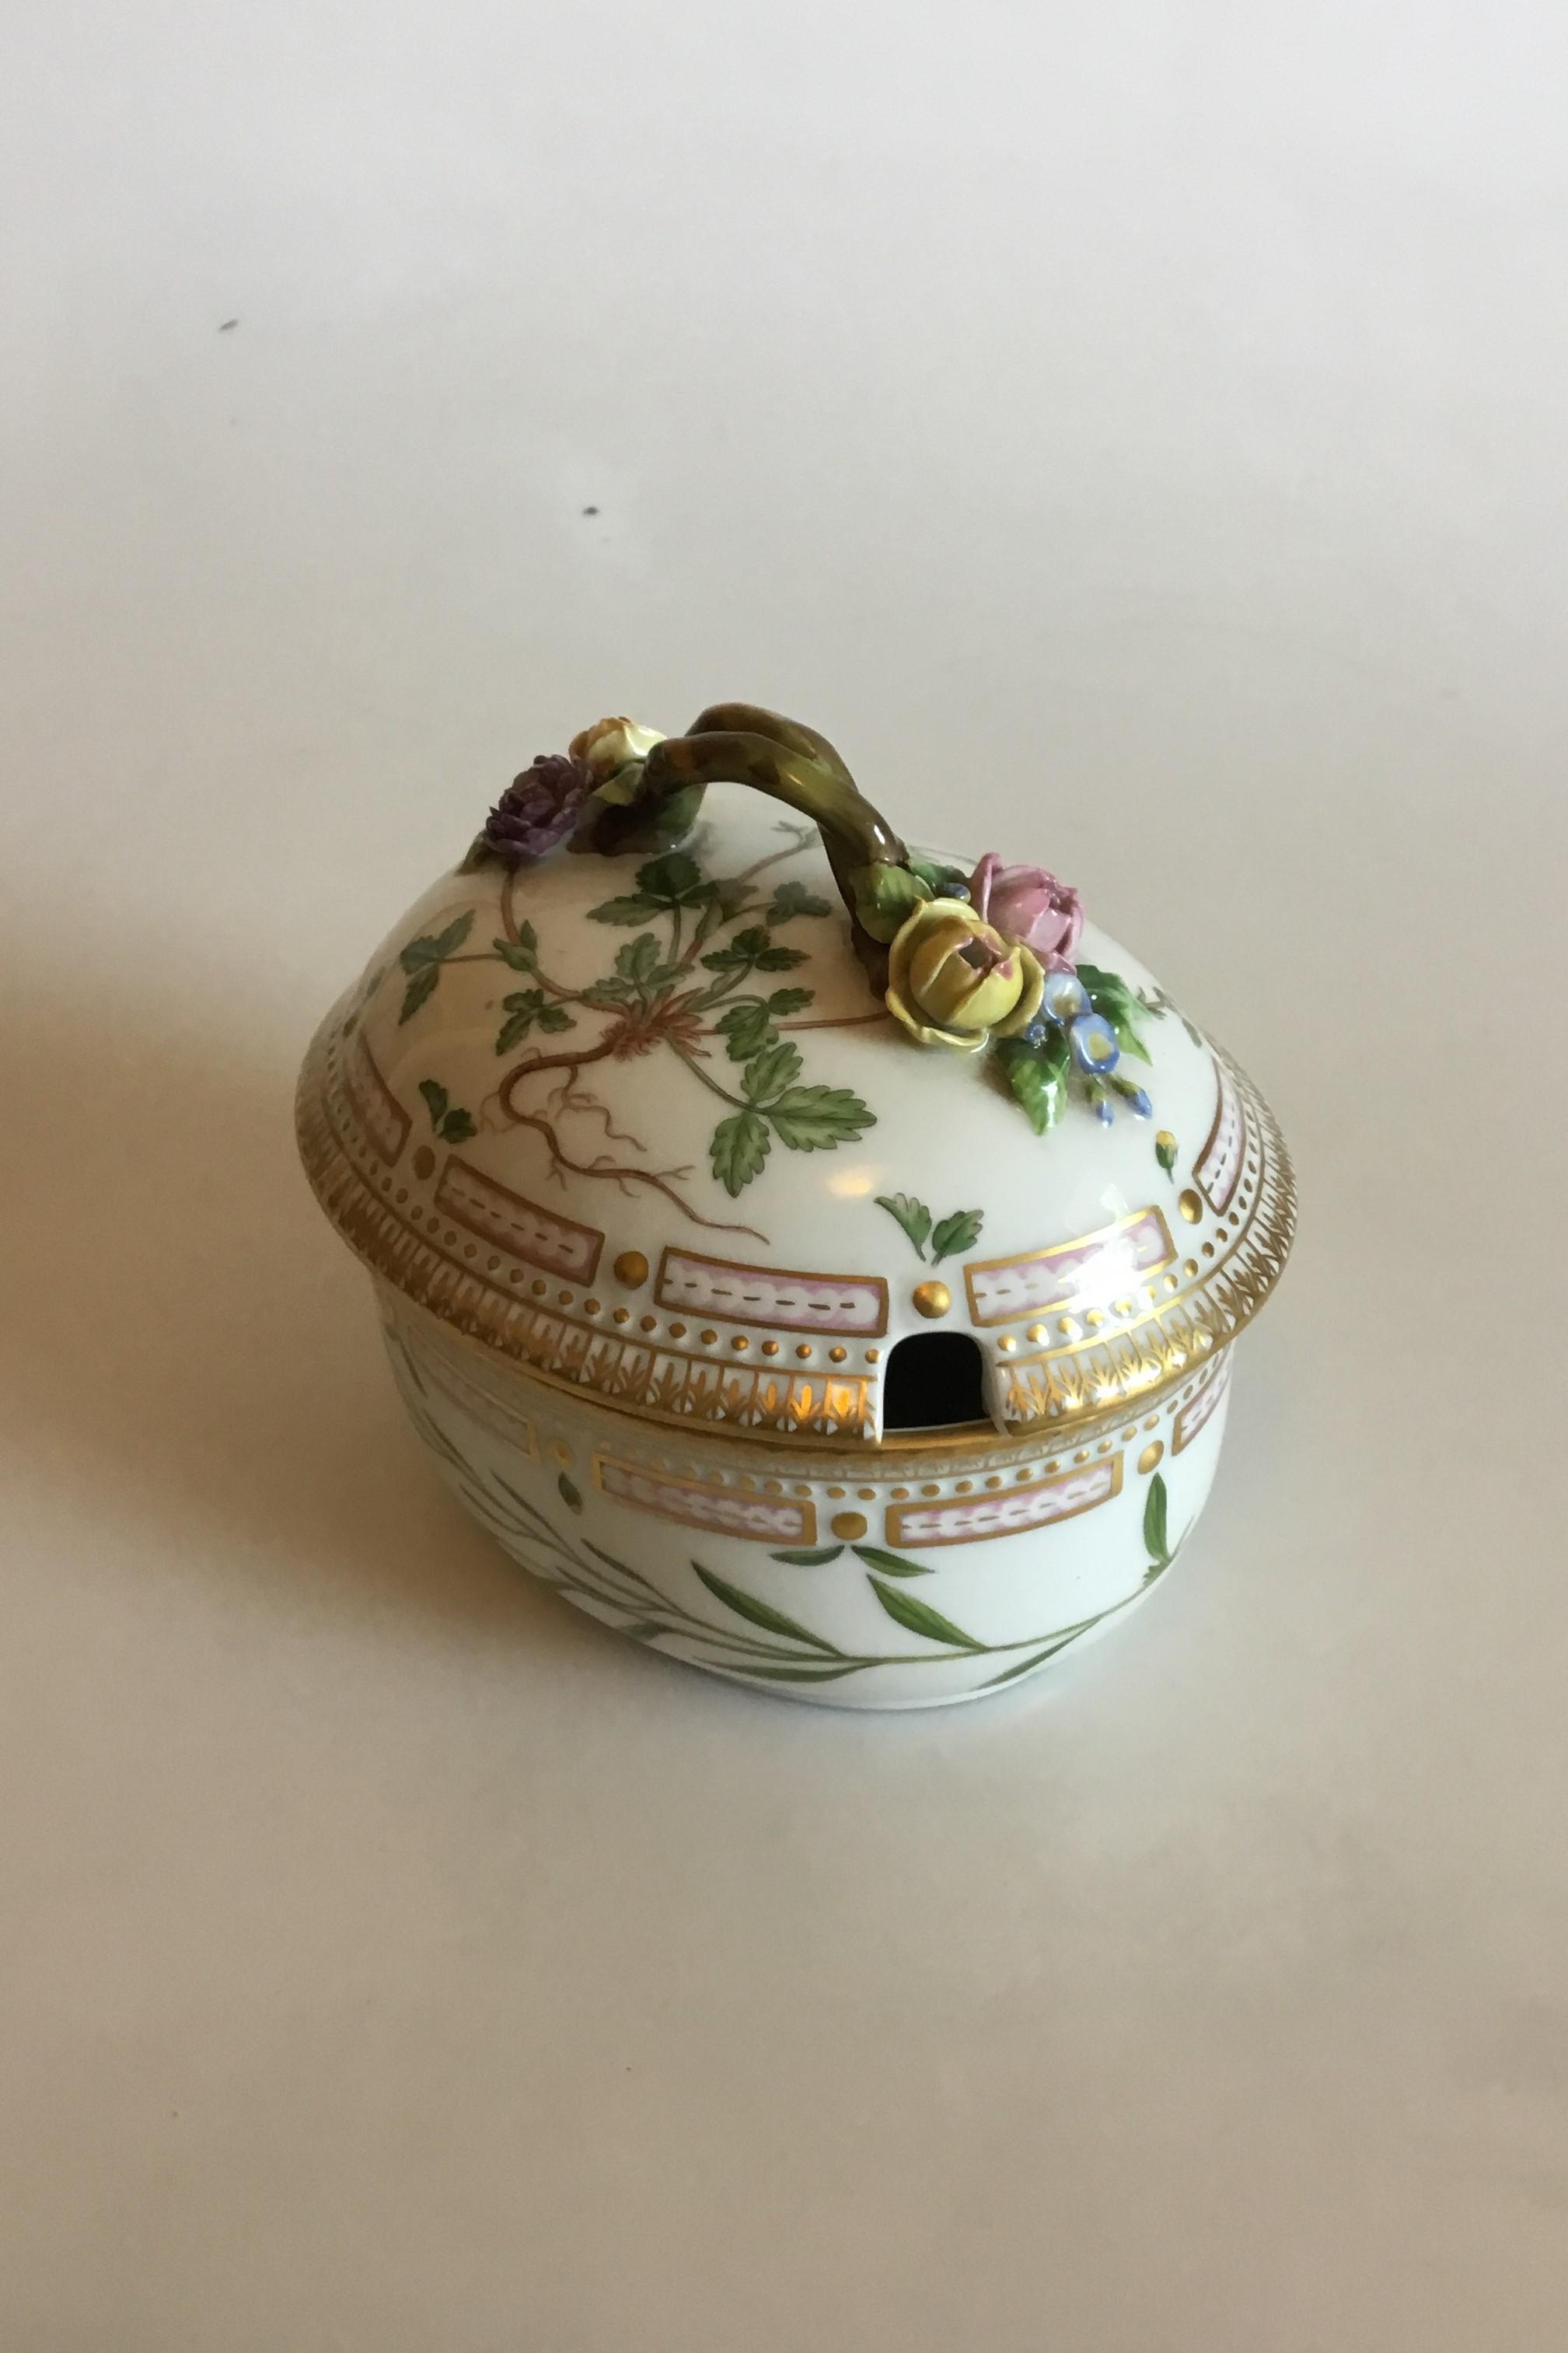 Royal Copenhagen Flora Danica large sugar bowl or little tureen No 20/3582. Measures: 16 cm / 6 19/64 in. x 14 cm / 5 33/64 in.
1st quality.
Latin Name: 